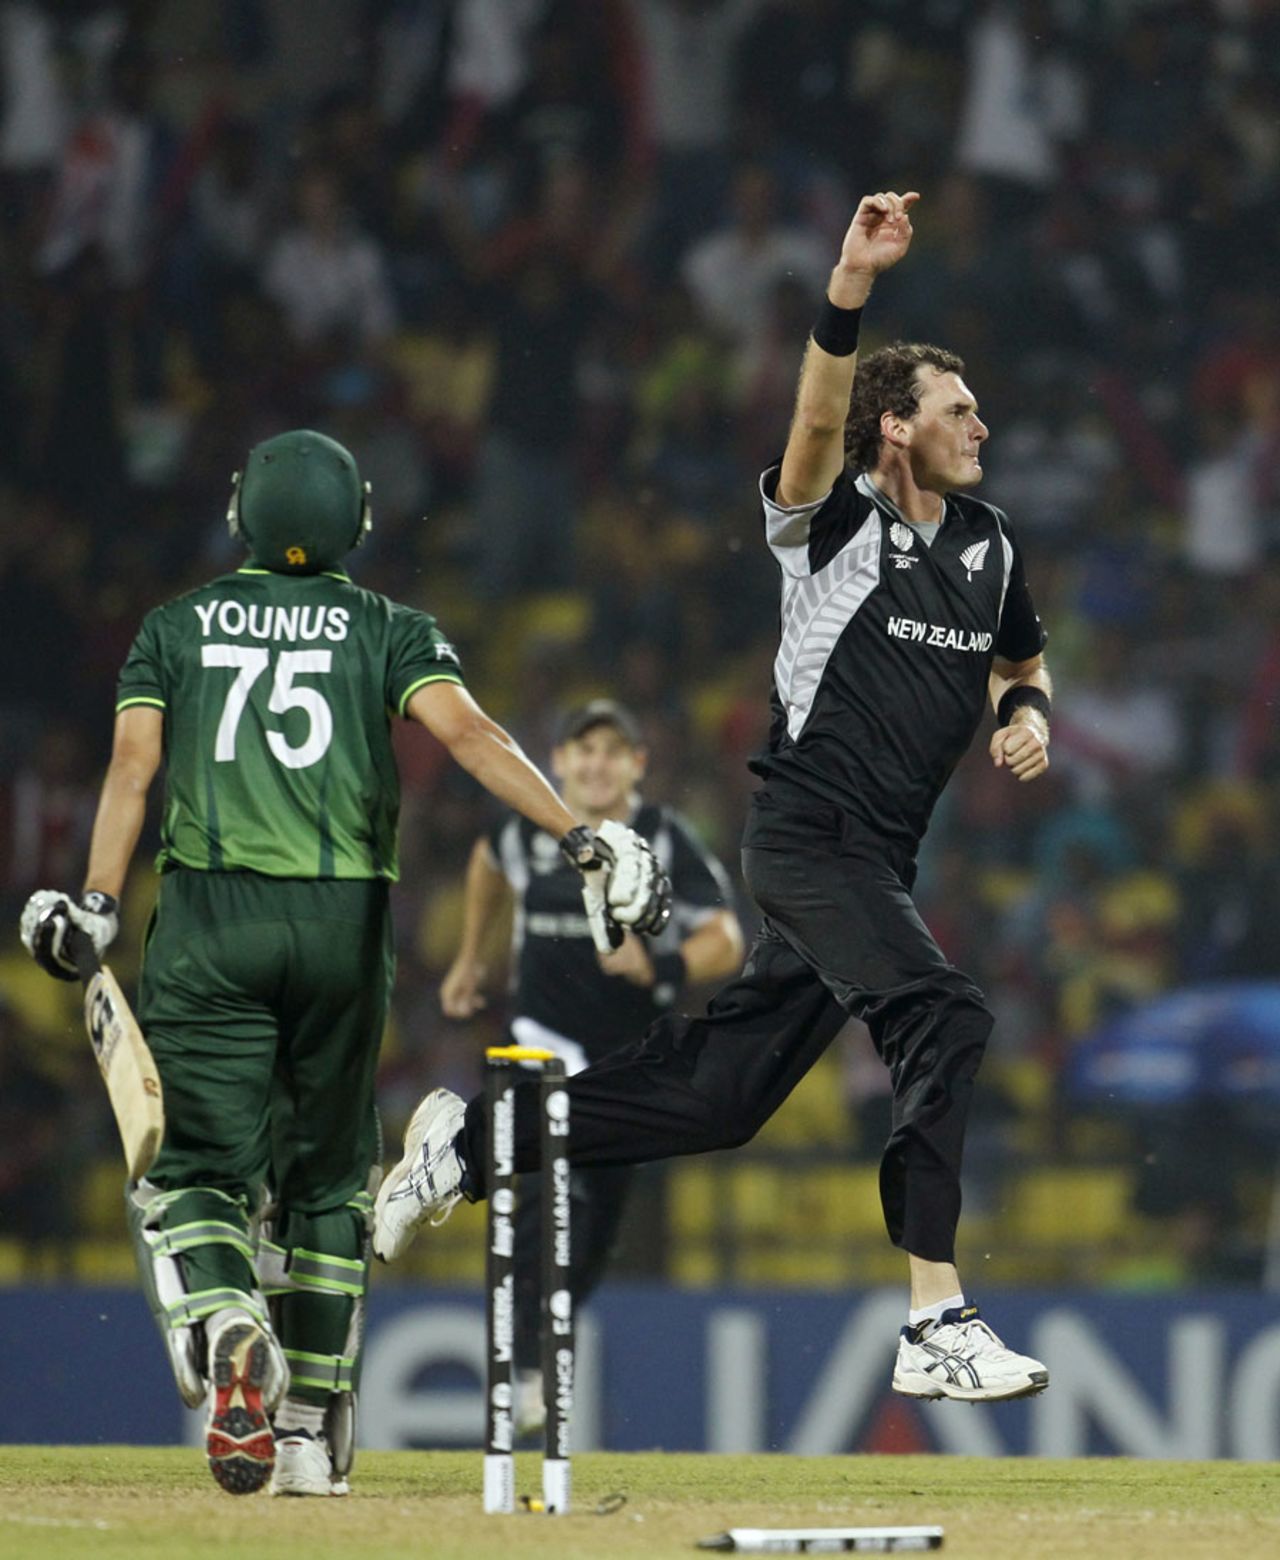 Kyle Mills got the important wicket of Younis Khan, New Zealand v Pakistan, Group A, World Cup, Pallekele, March 8, 2011